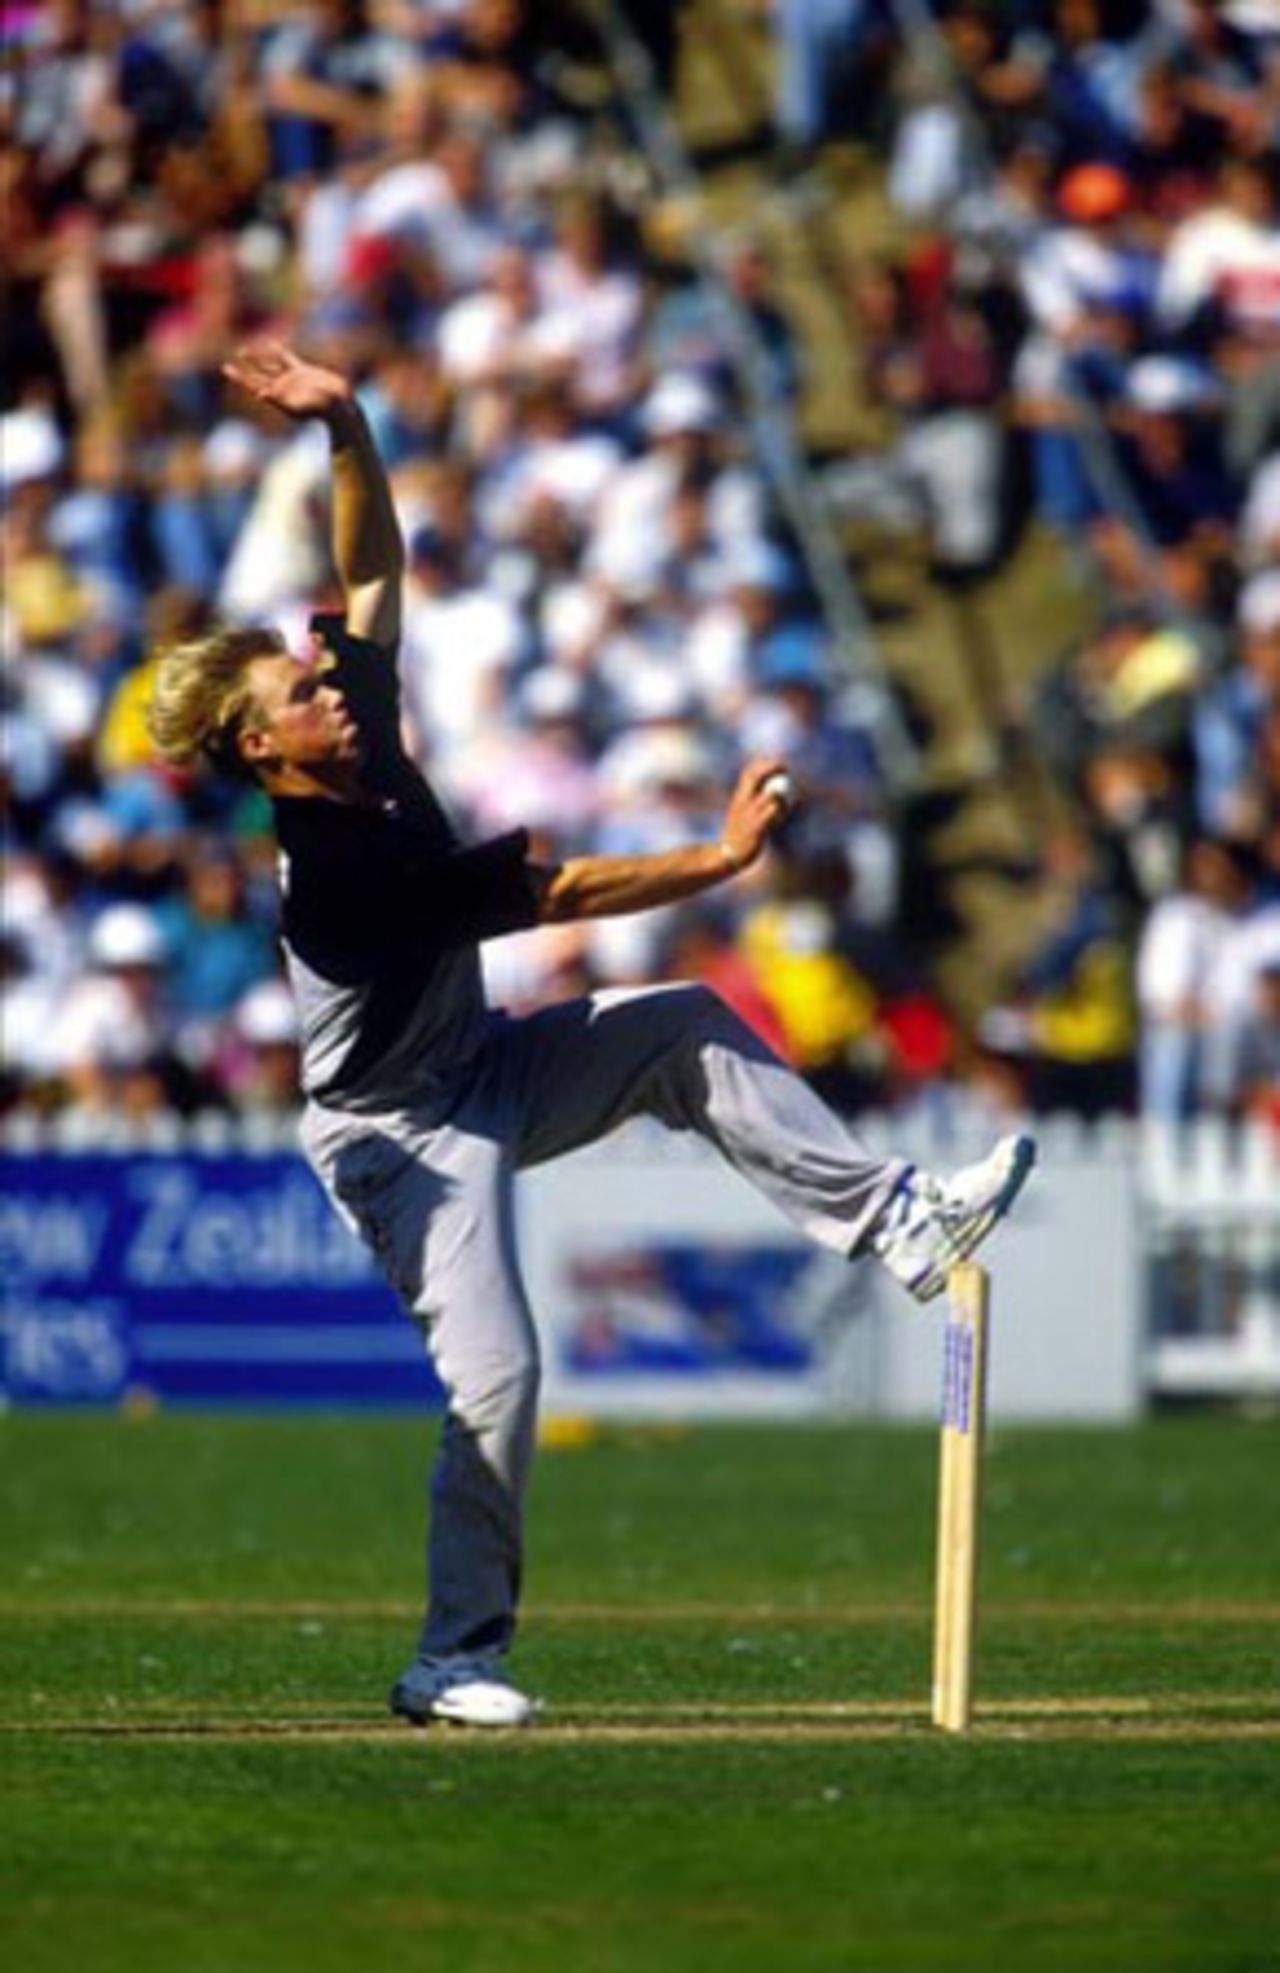 New Zealand bowler Jeff Wilson delivers a ball. 3rd ODI: New Zealand v Australia at Basin Reserve, Wellington, 24 March 1993.